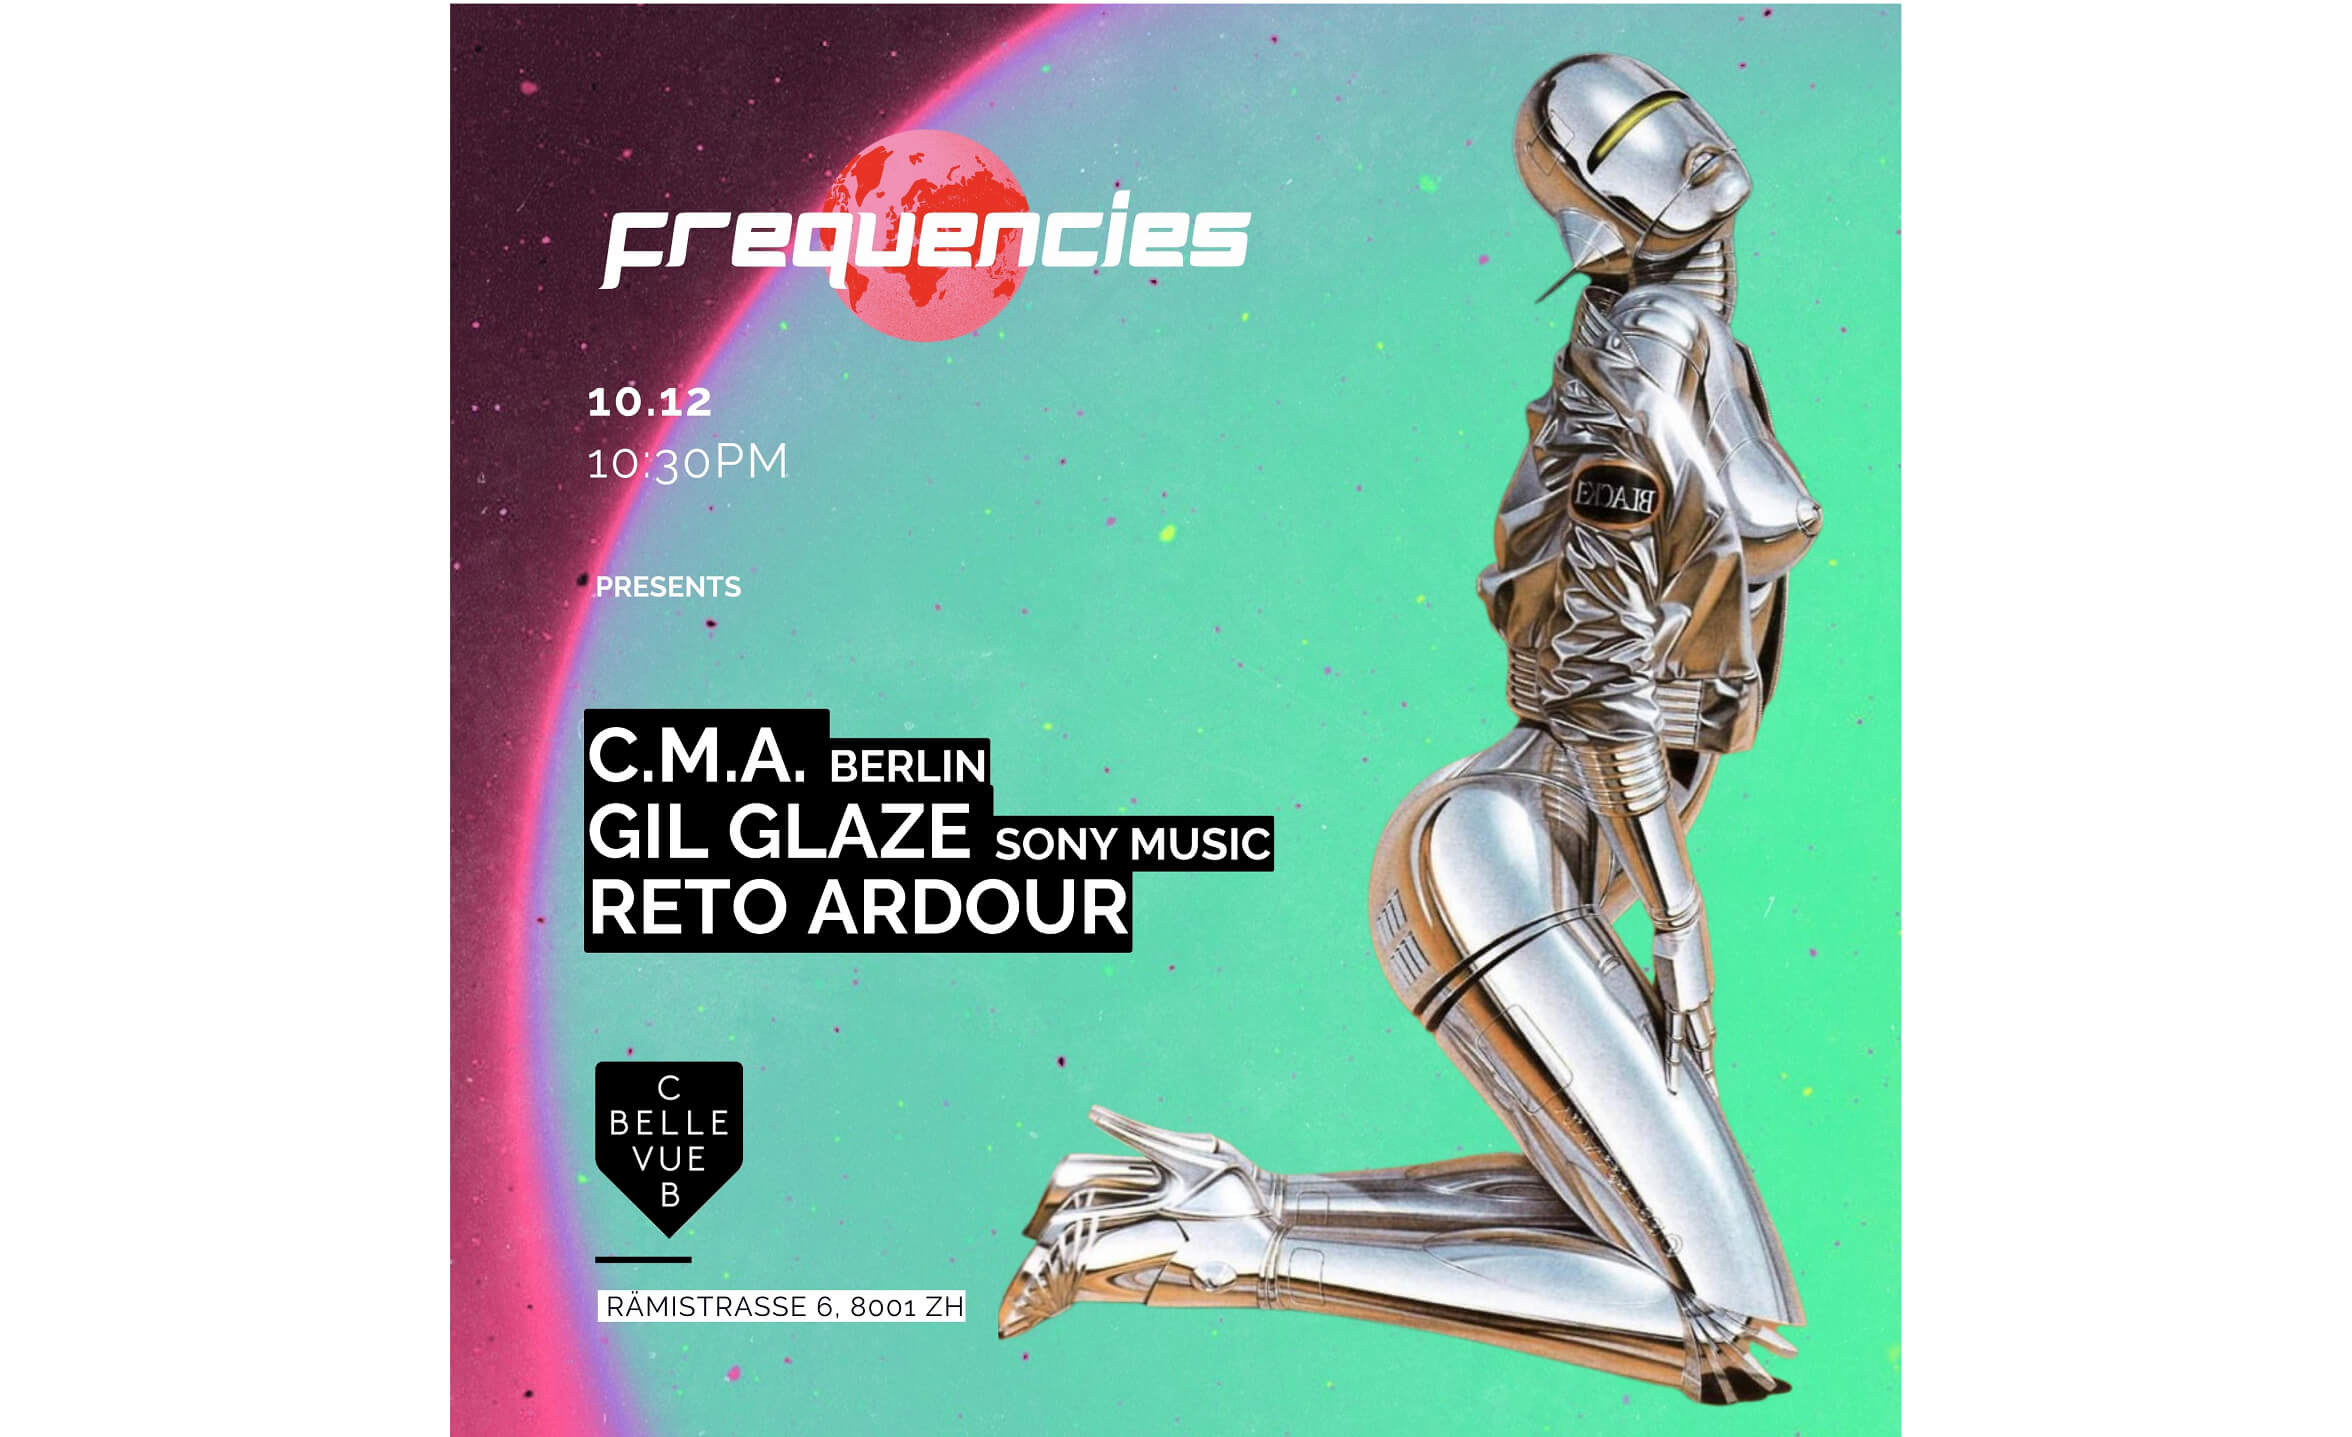 Event-Image for 'Berlin Frequencies X 10.12 Club Bellevue X @frequenciesparty'